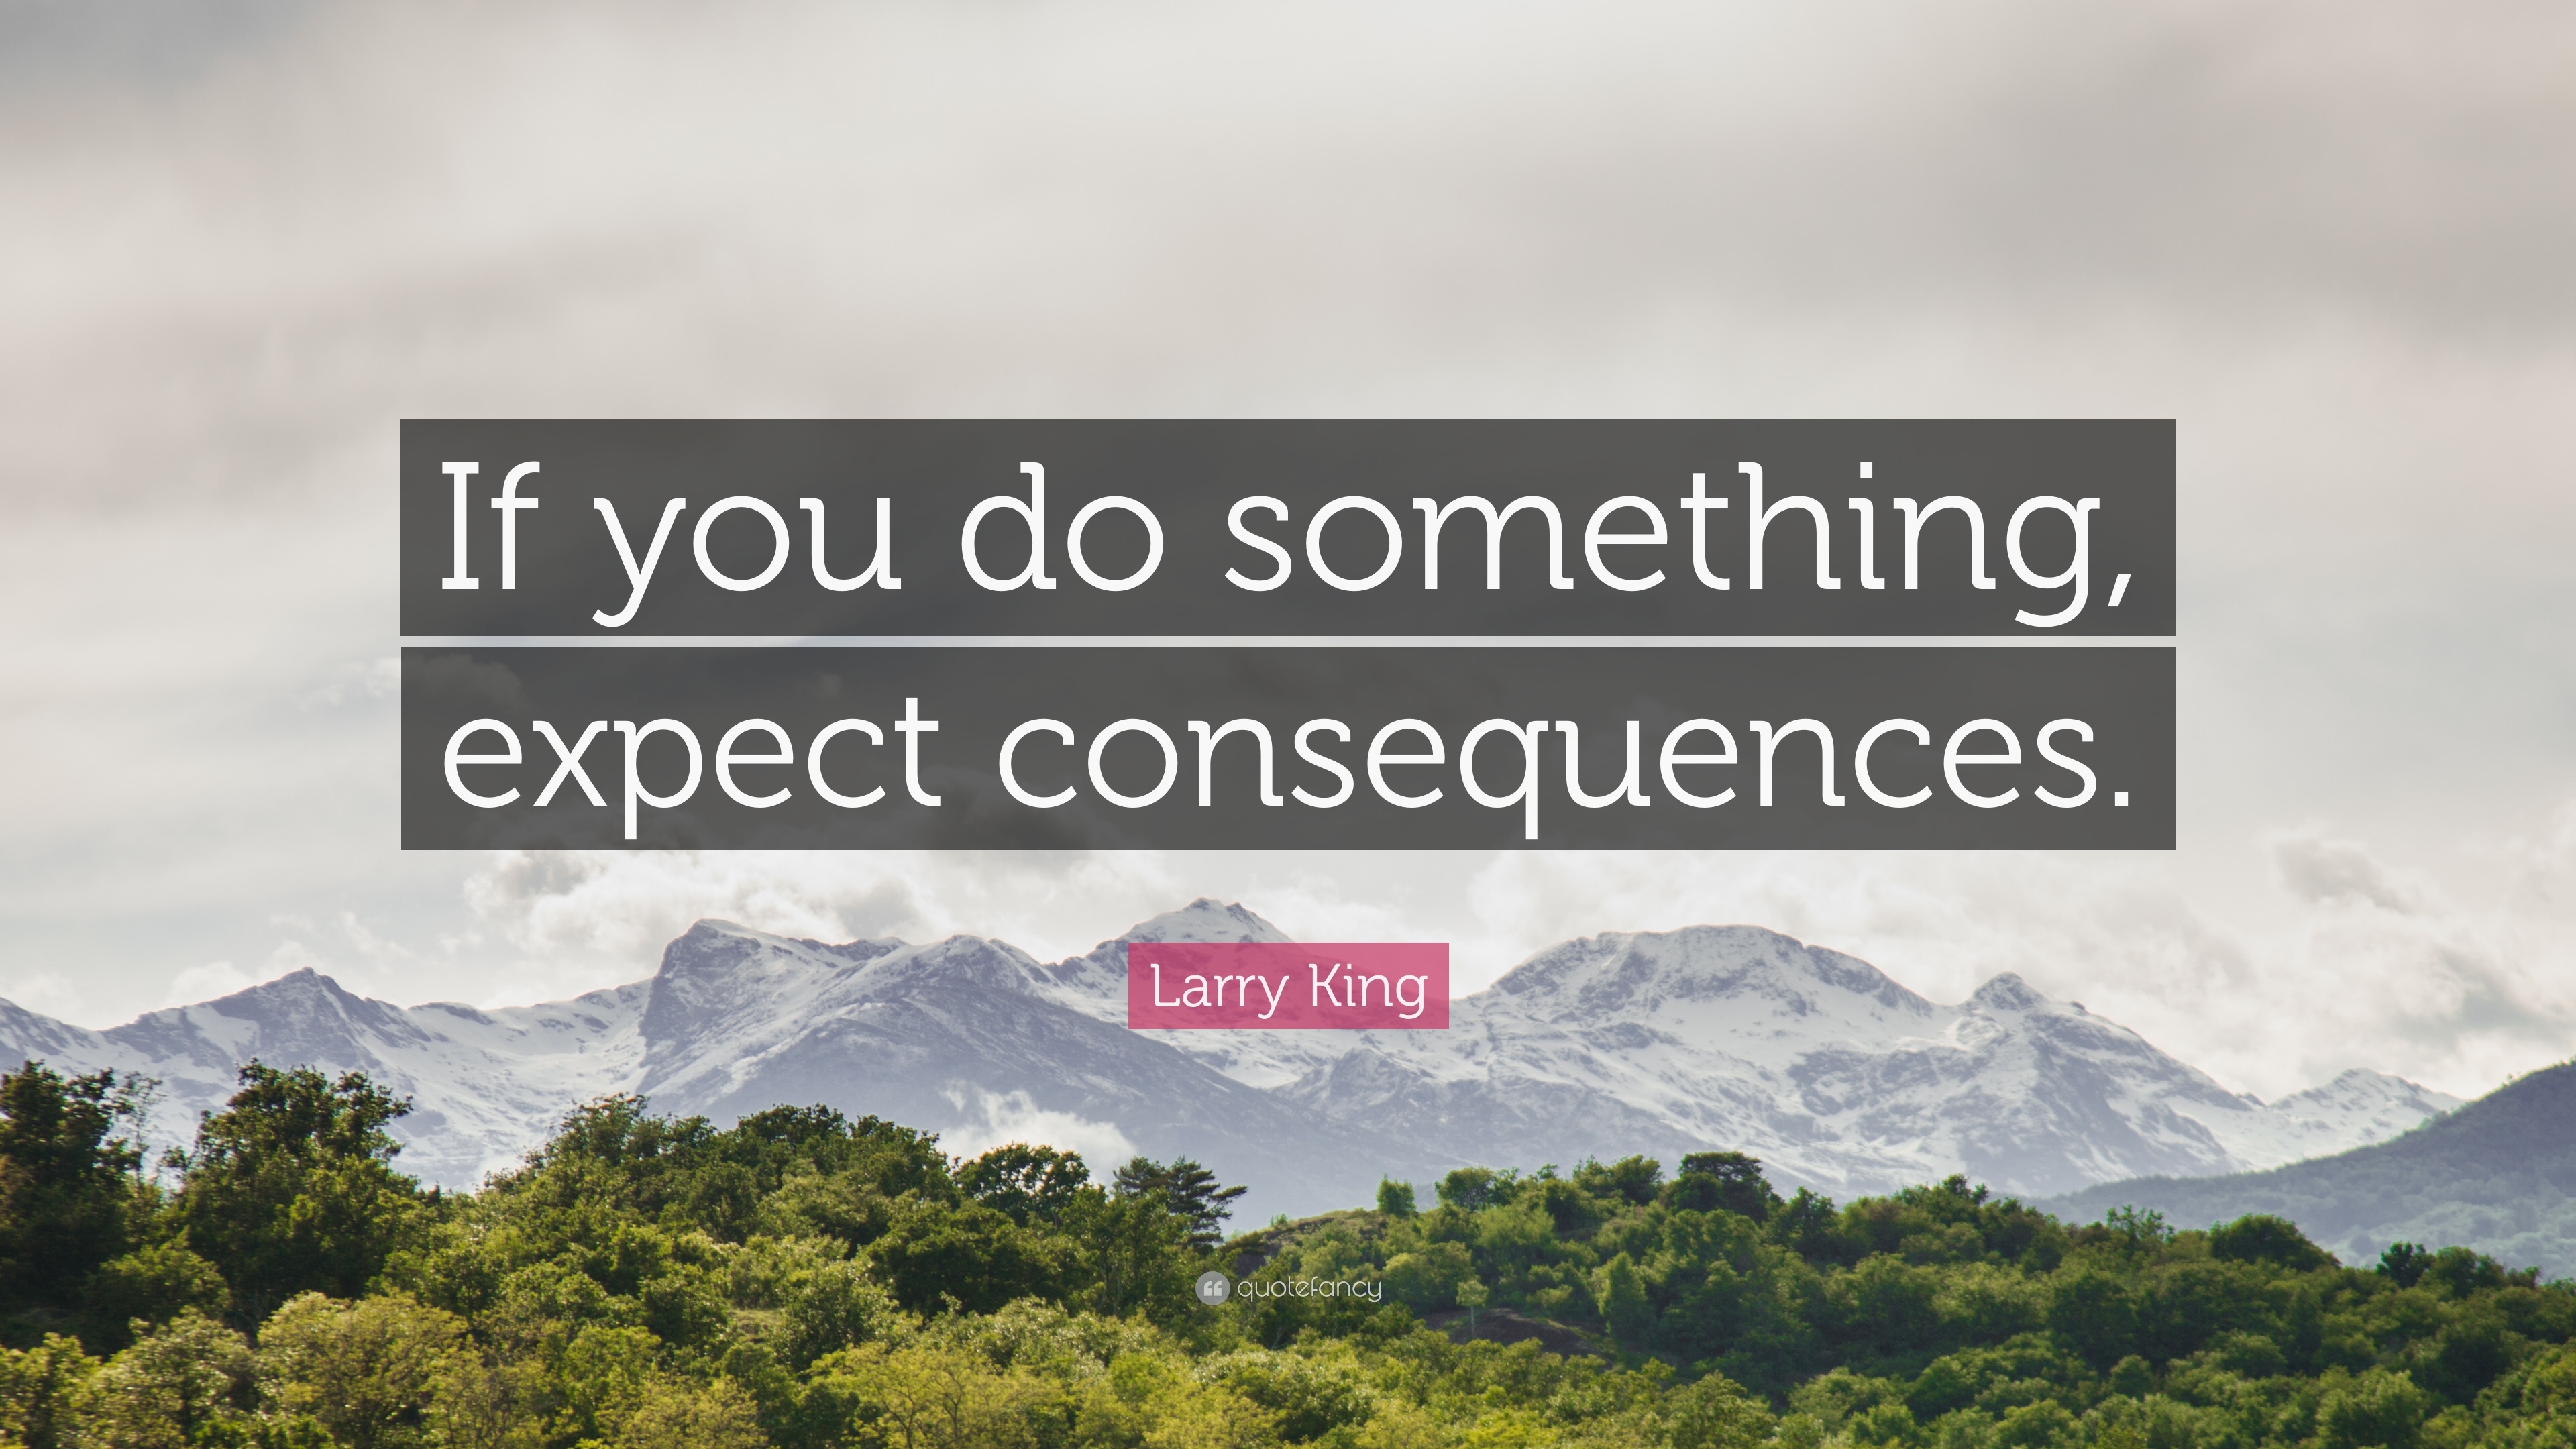 Larry King Quote: “If you do something, expect consequences.” 7